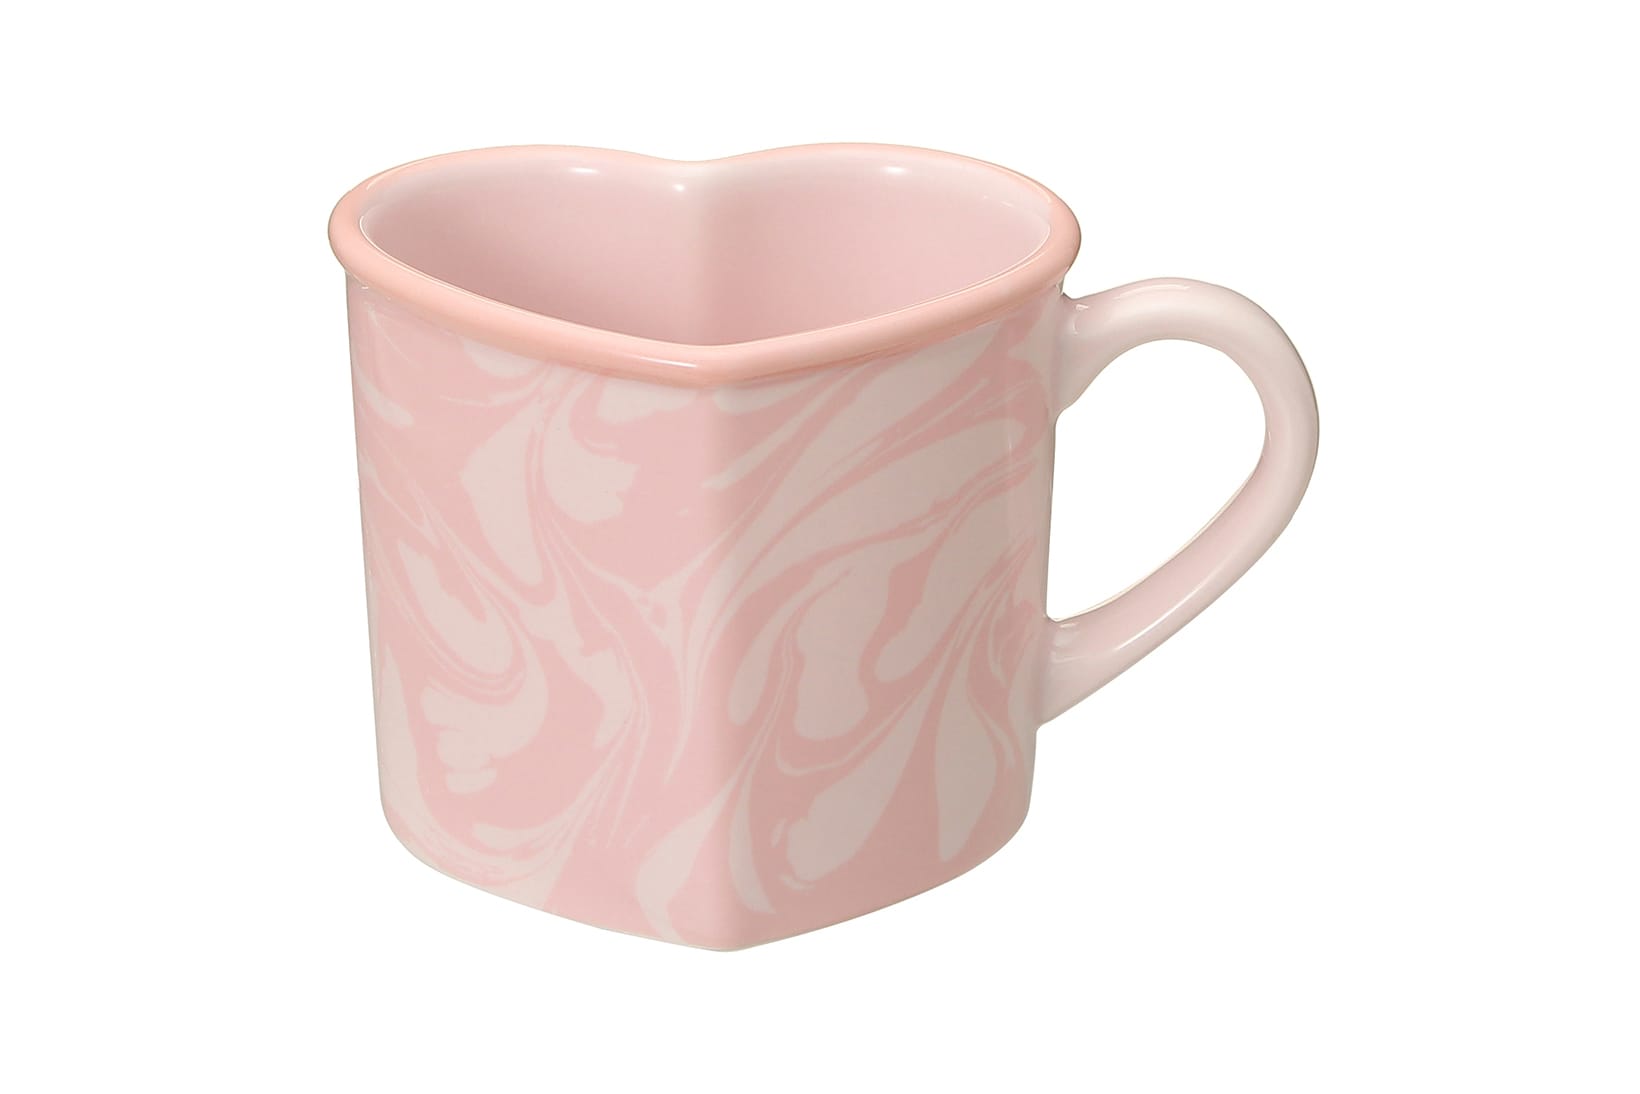 Starbucks Japan VALENTINE'S DAY Limited Heart Pink Coffee Mug Cup made in Japan 